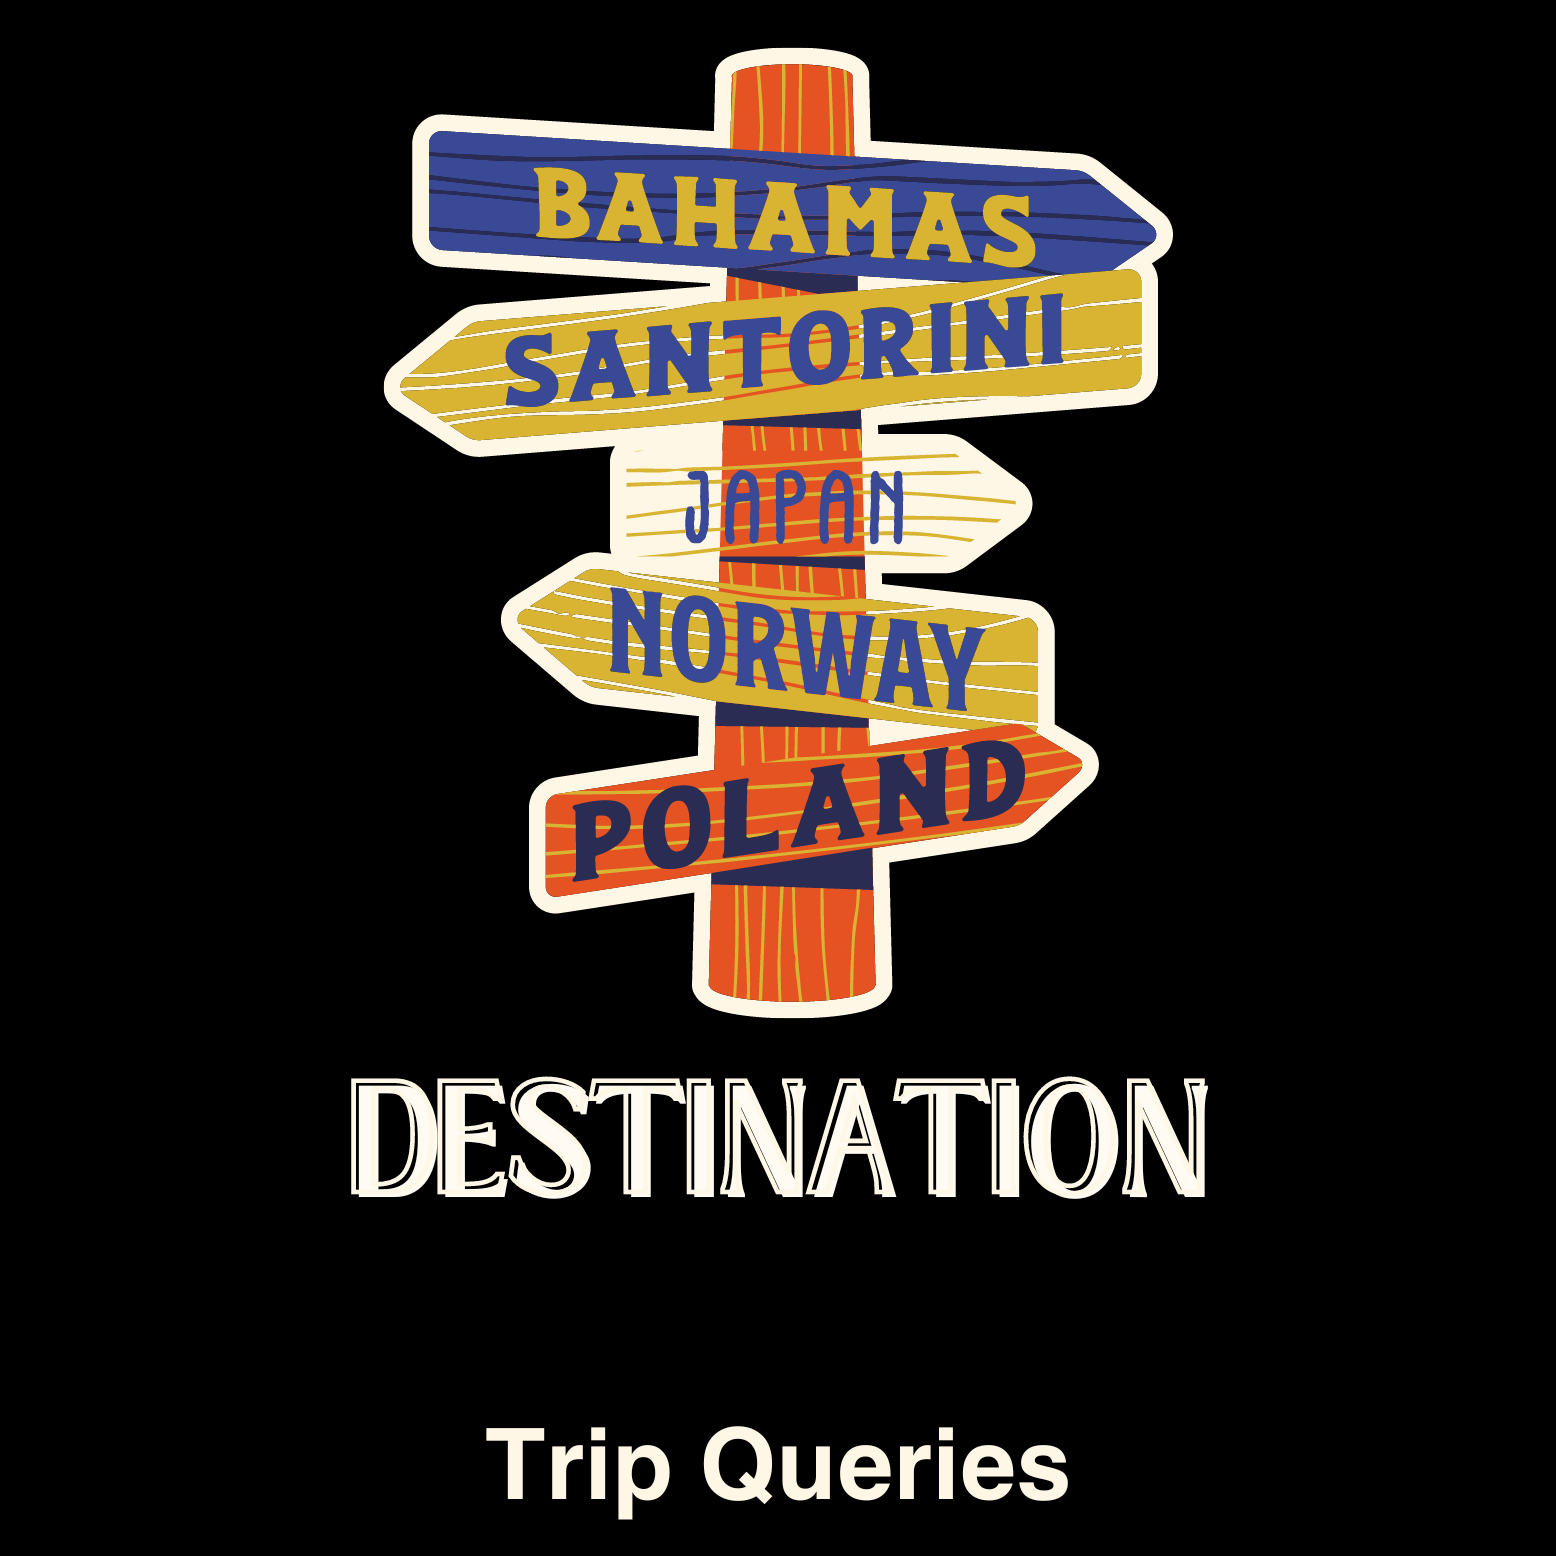 Travel Tips & Destinations Details By TripQueries